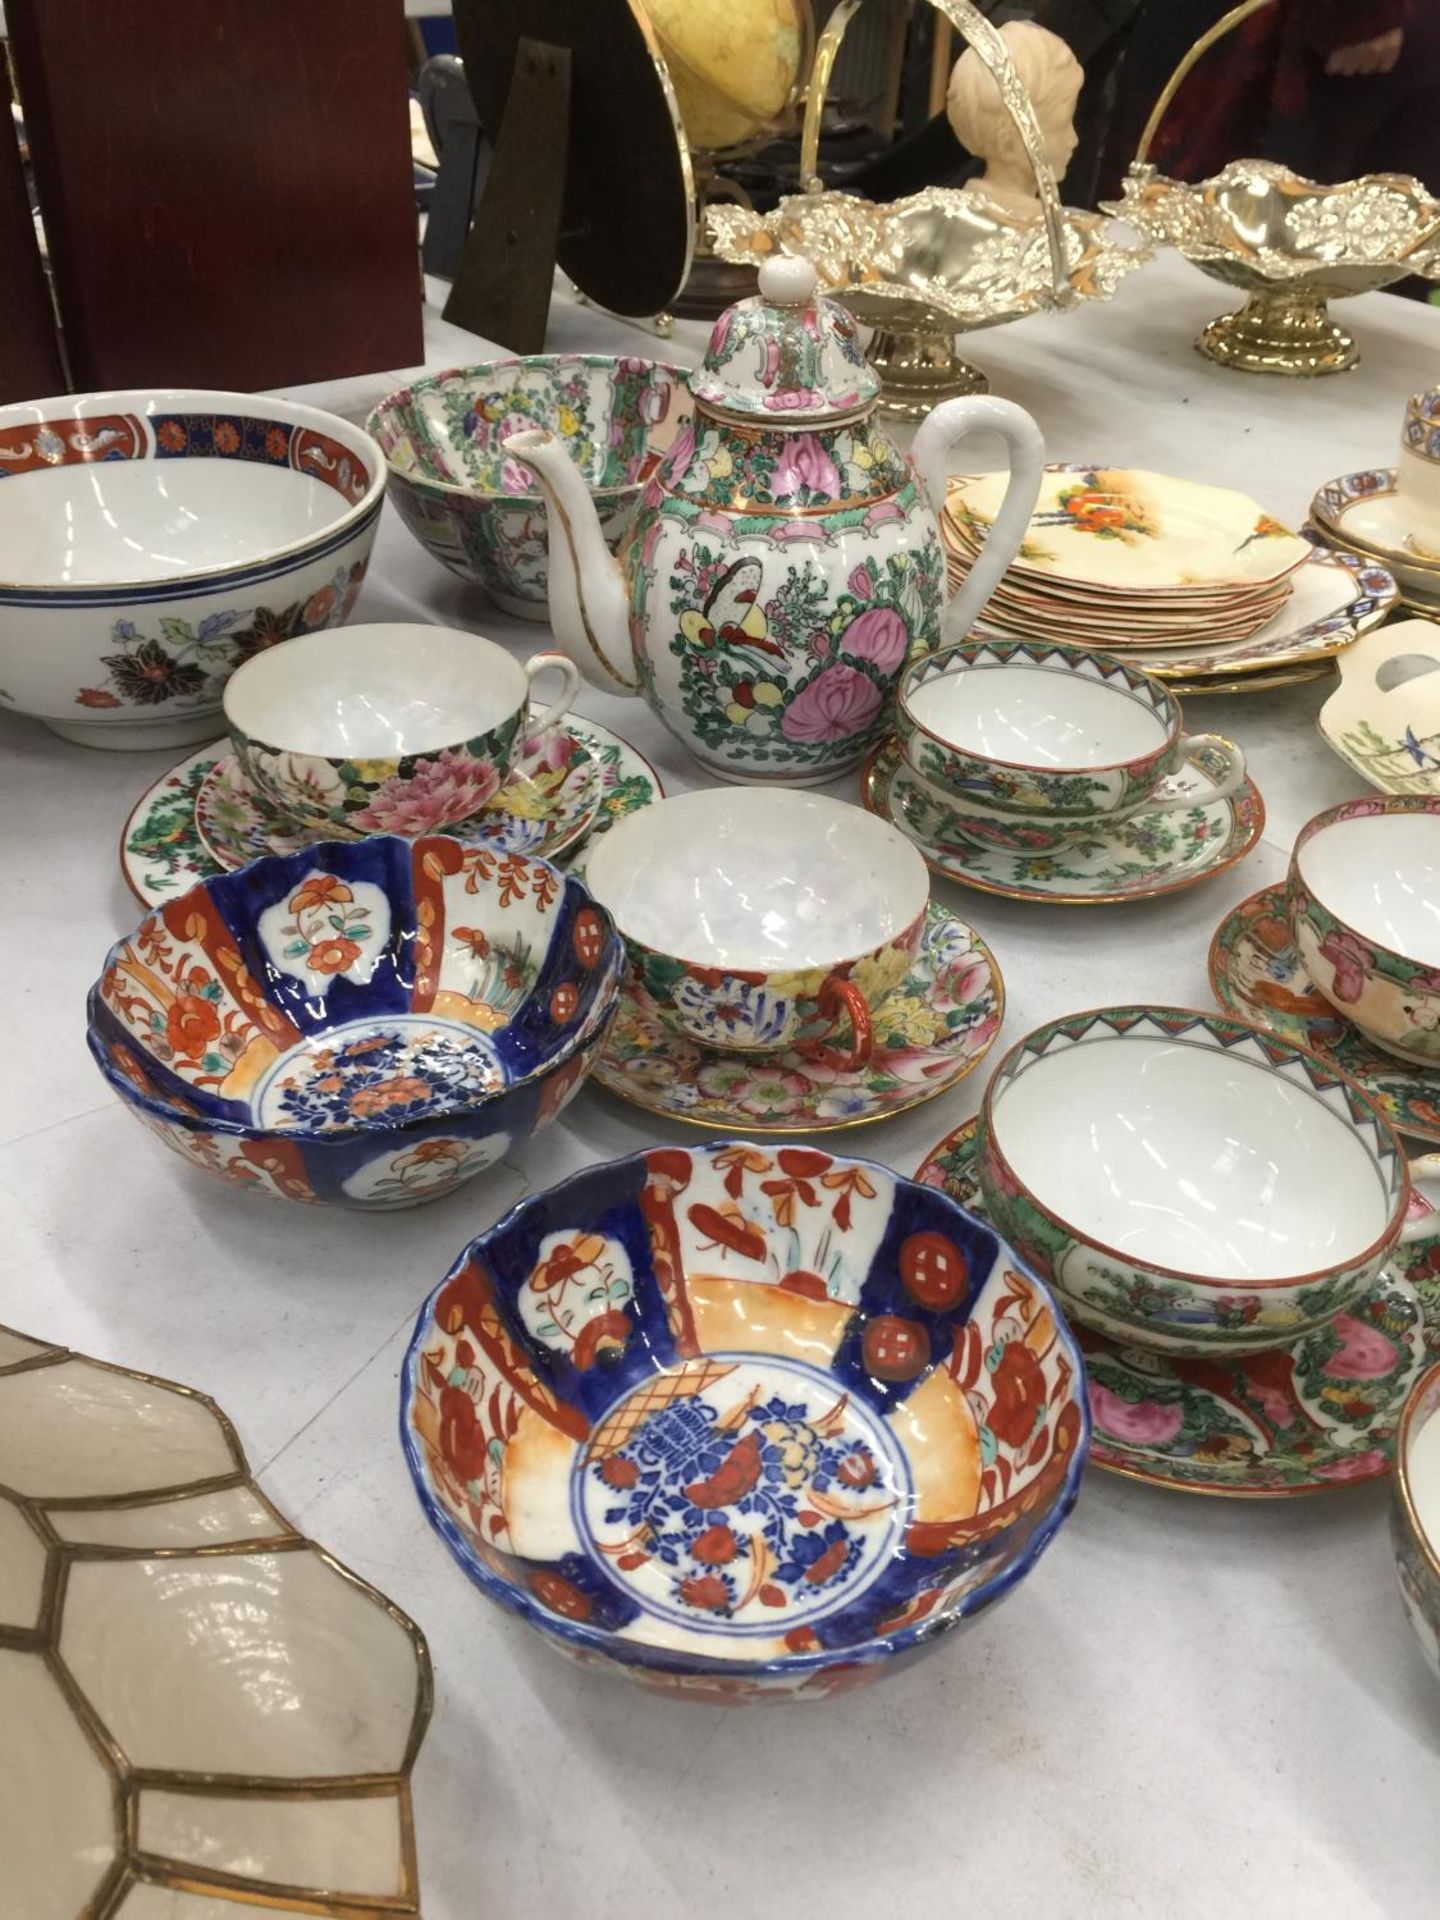 A QUANTITY OF ORIENTAL CHINA INCLUDING CUPS, SAUCERS, BOWLS, TEAPOT, ETC - Image 3 of 3